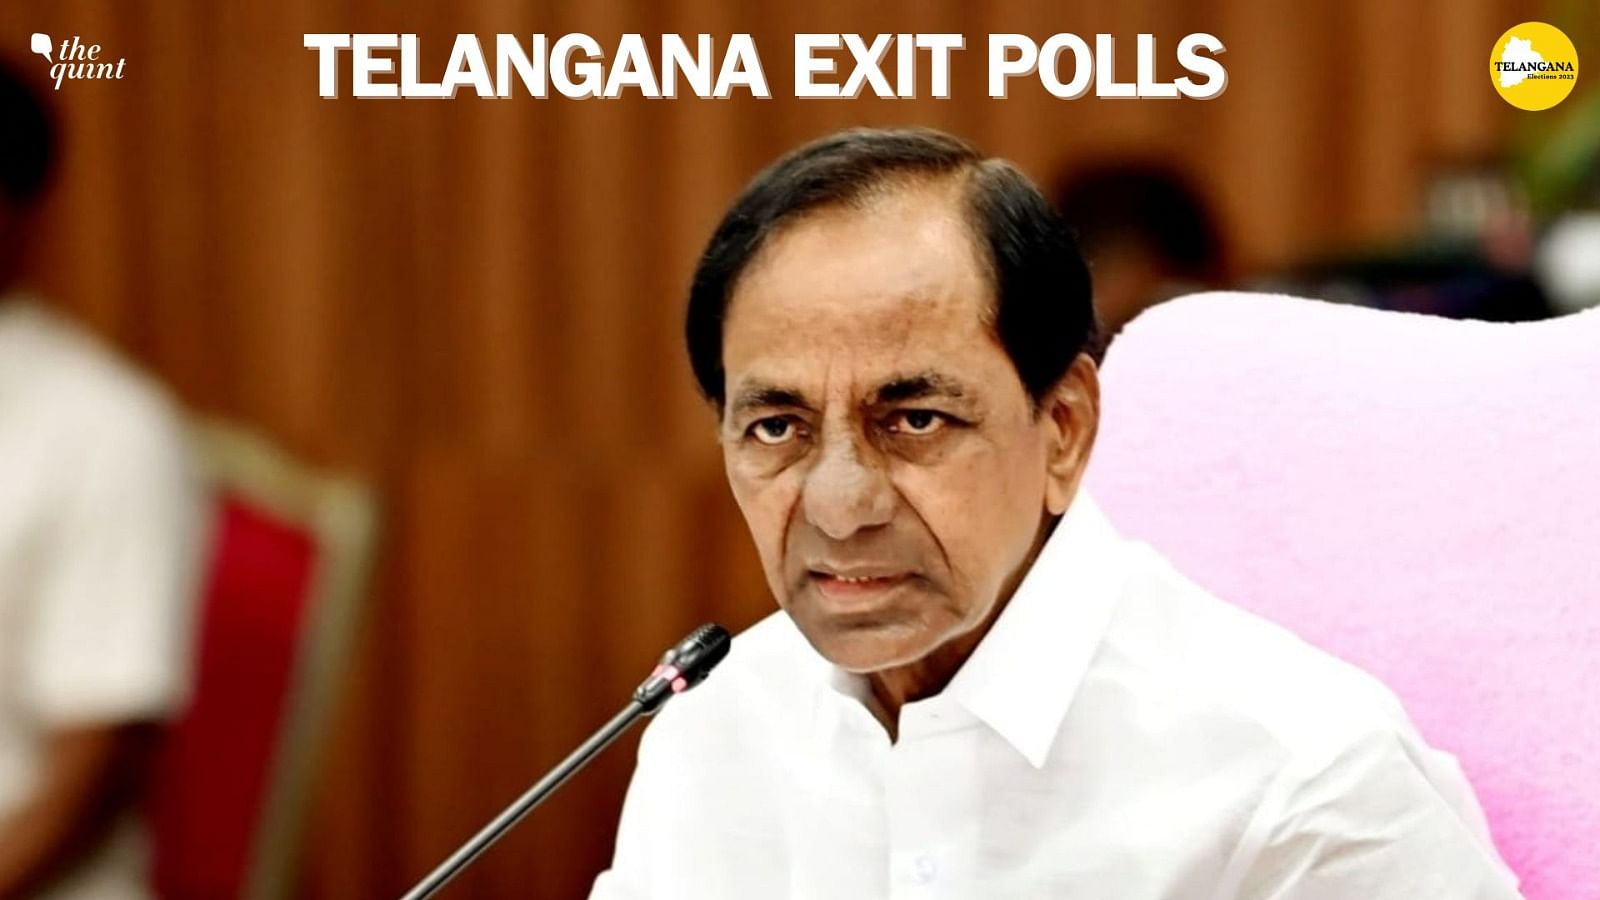 <div class="paragraphs"><p>Exit polls for the Telangana Assembly (which went to polls on Thursday, 30 November) have largely given a massive edge to the Congress party, pushing Chief Minister K Chandrasekhar Rao's Bharat Rashtra Samithi (BRS) to a position of disadvantage.</p></div>